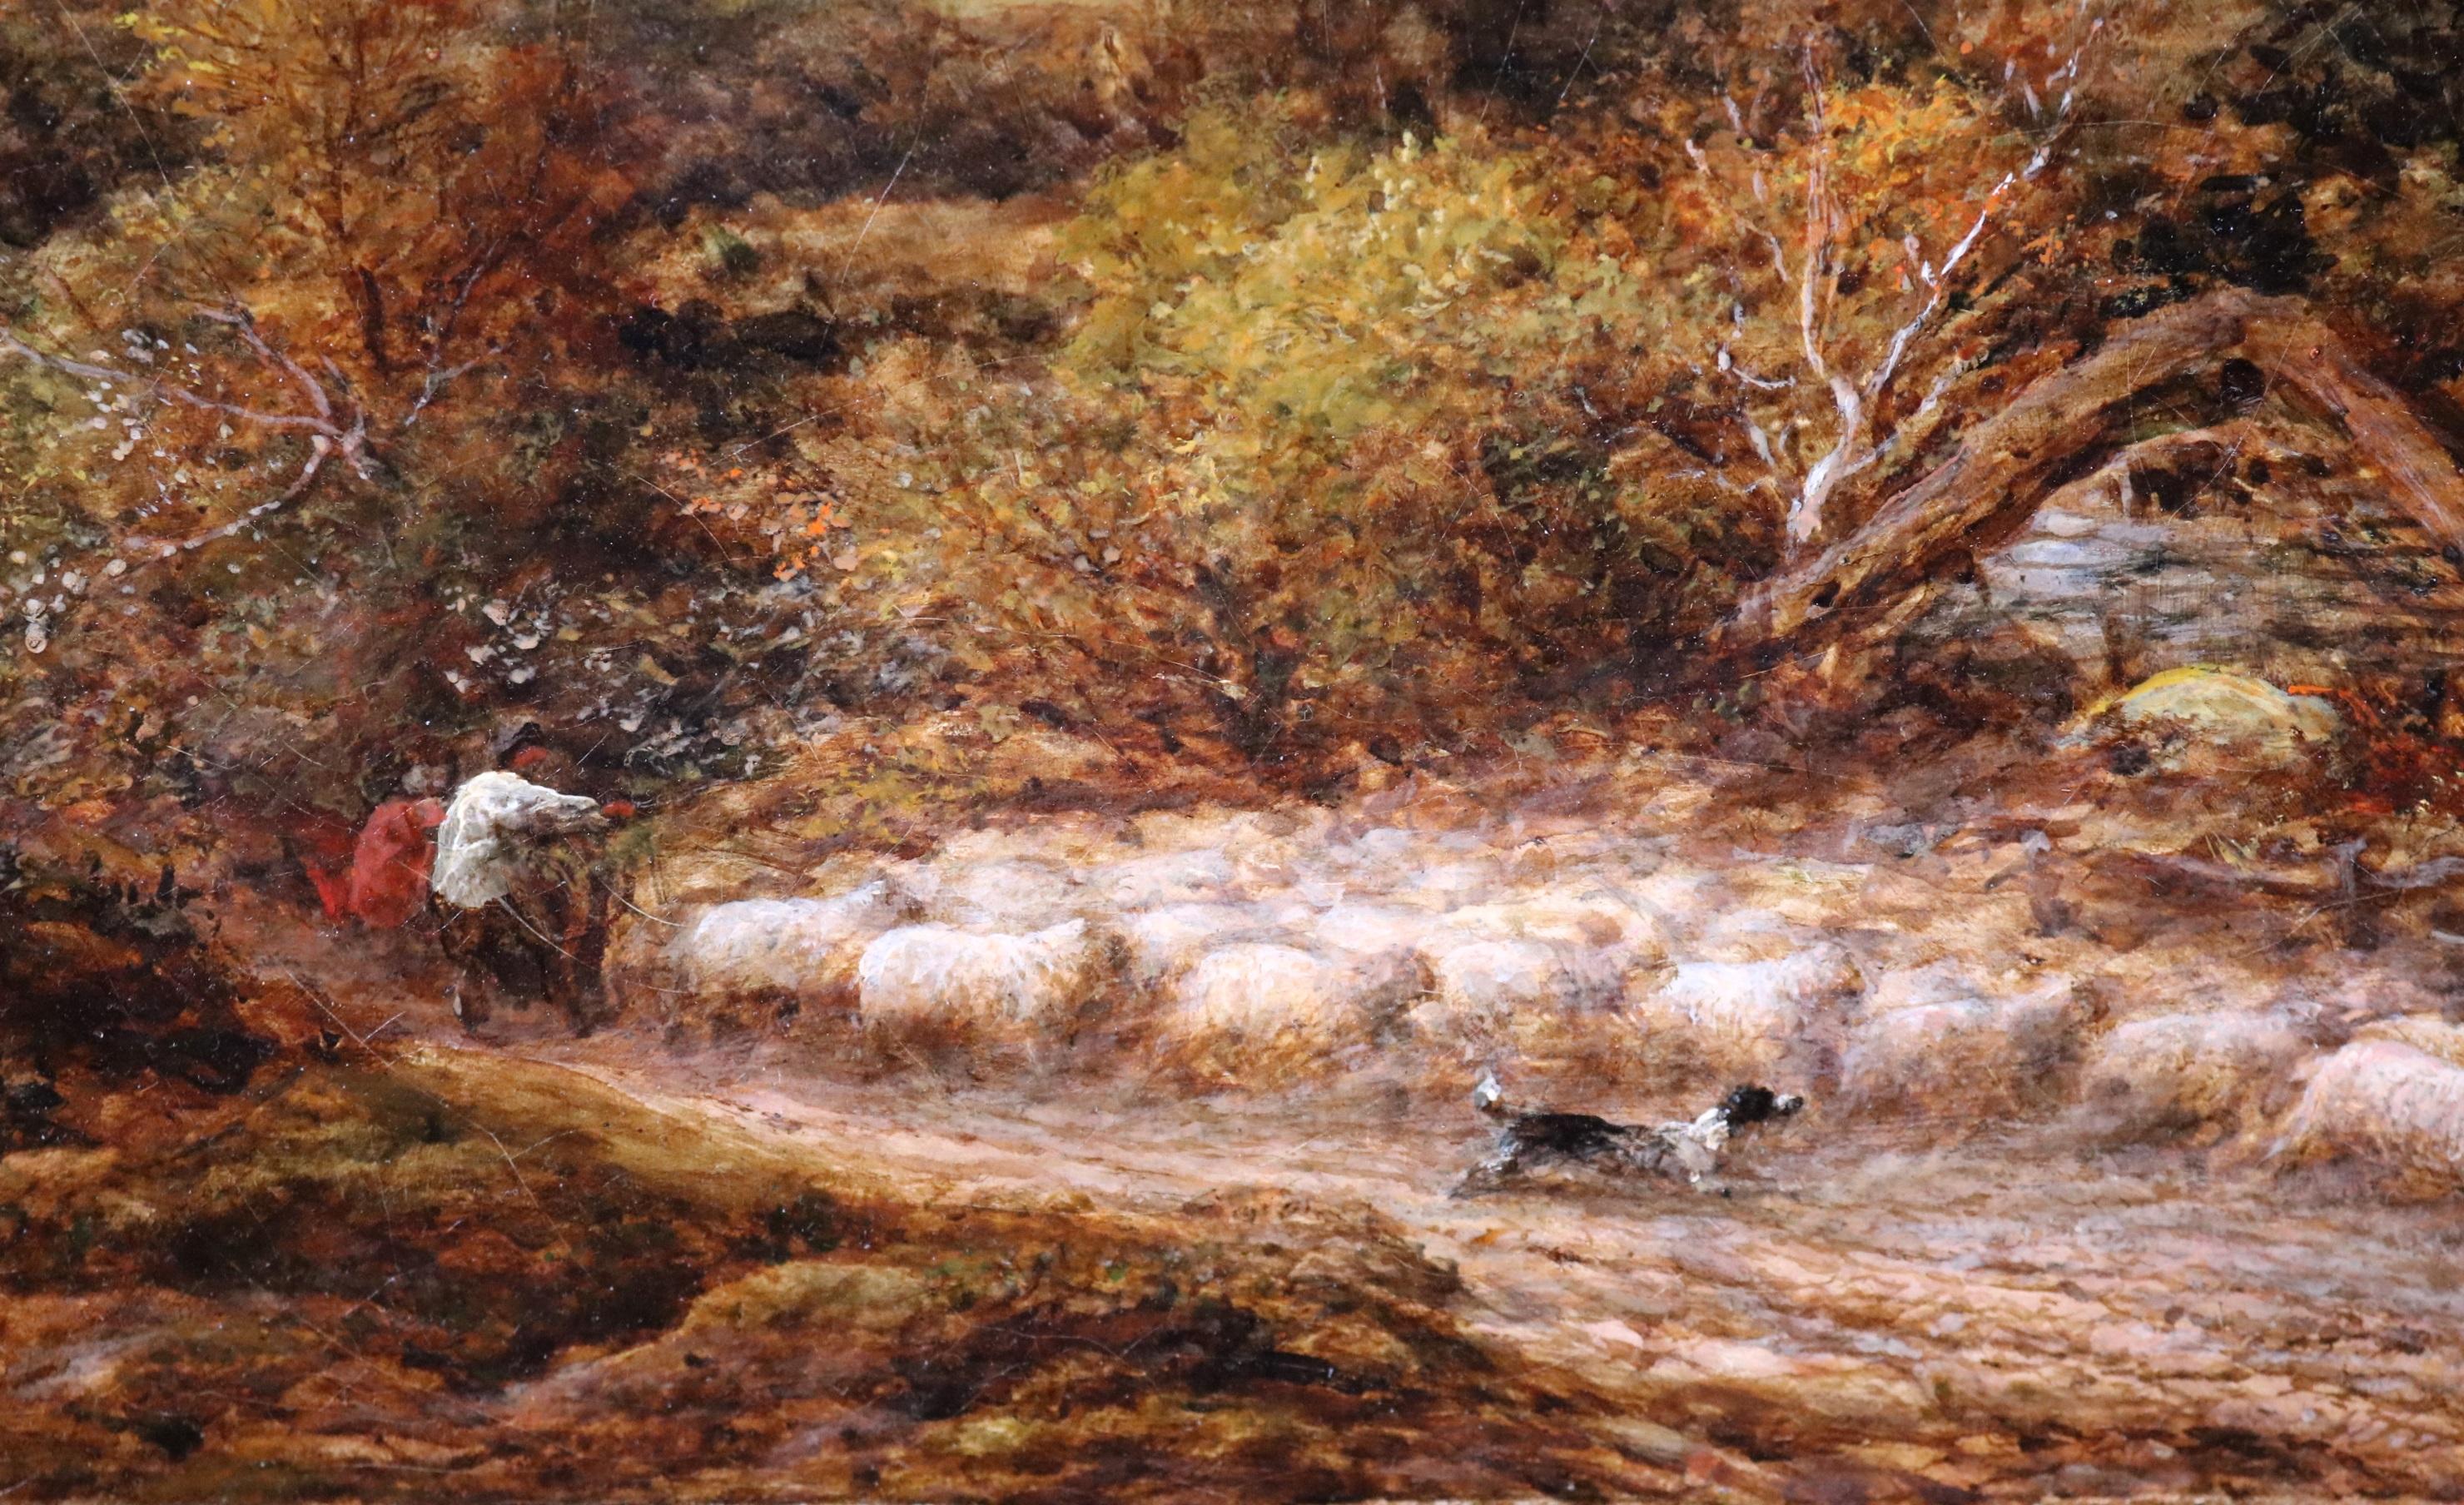 Shepherd & Sheep in Thunder Storm - Large 19th Century Landscape Oil Painting 5